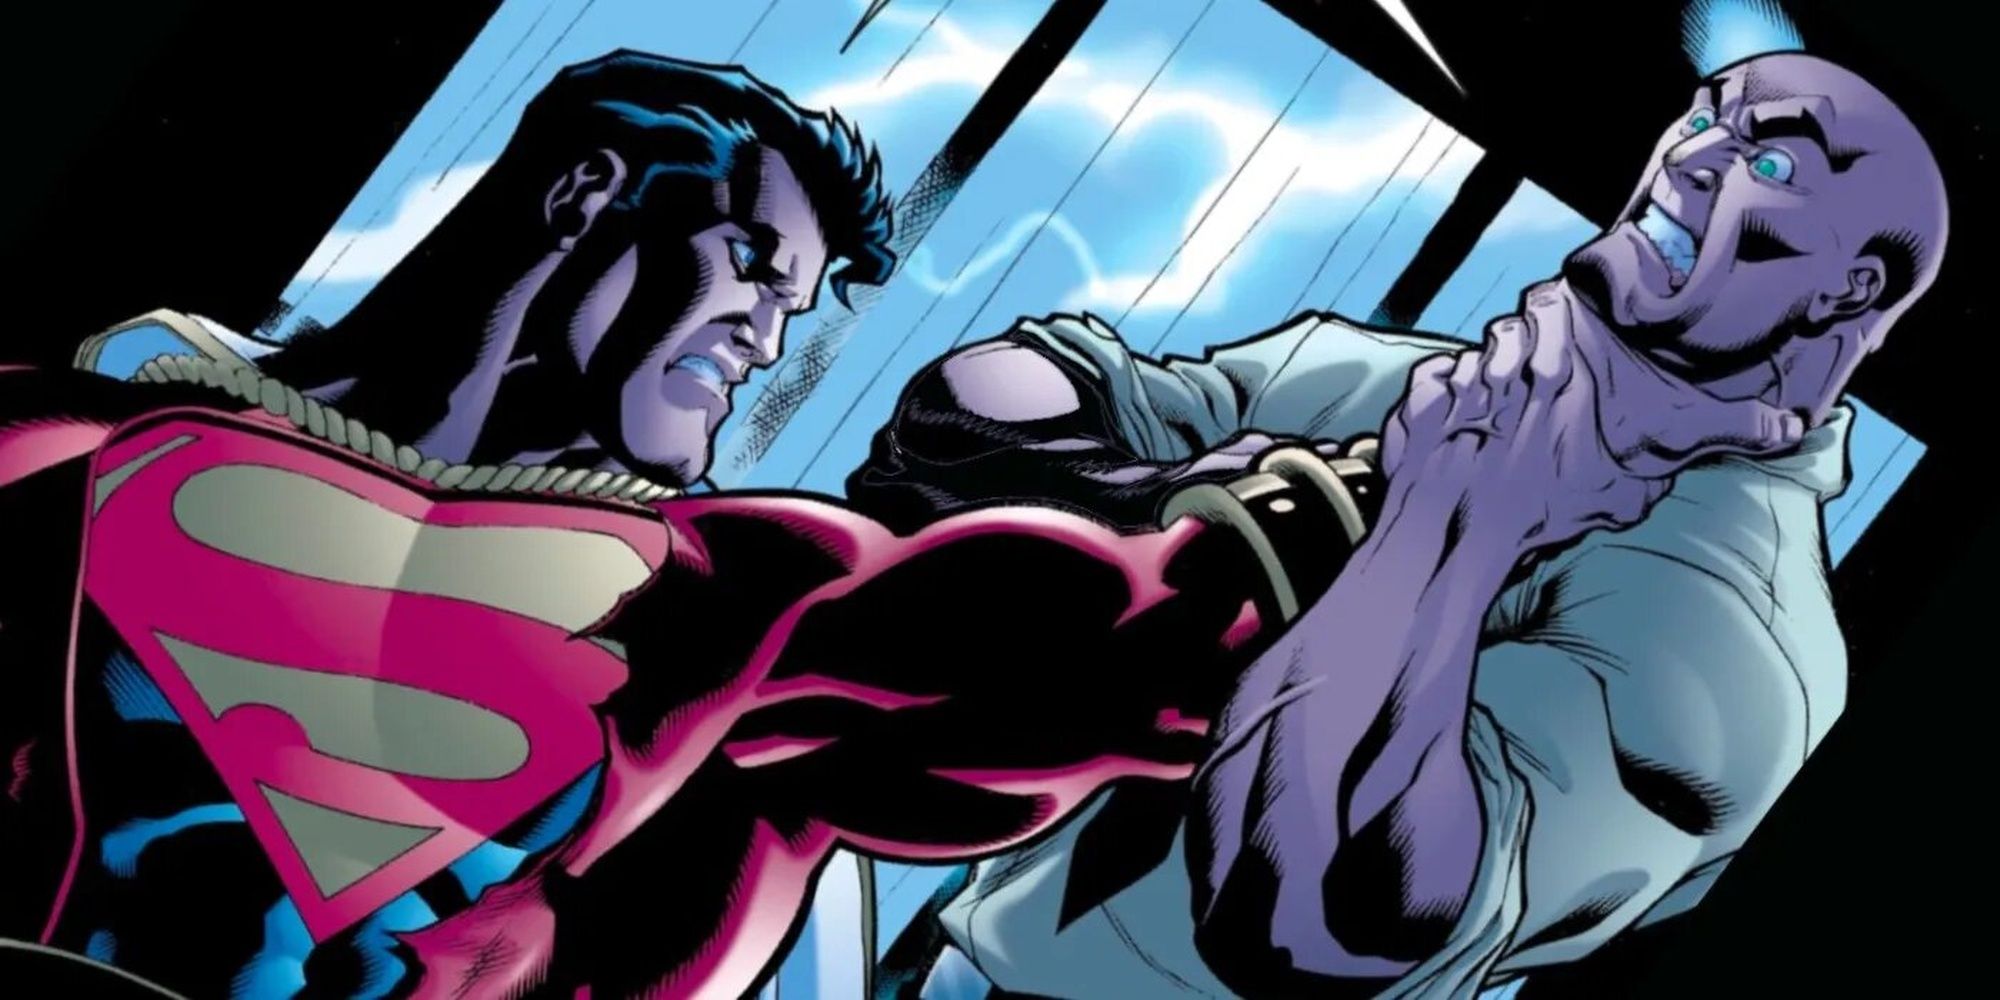 Superman holding Luthor by the neck